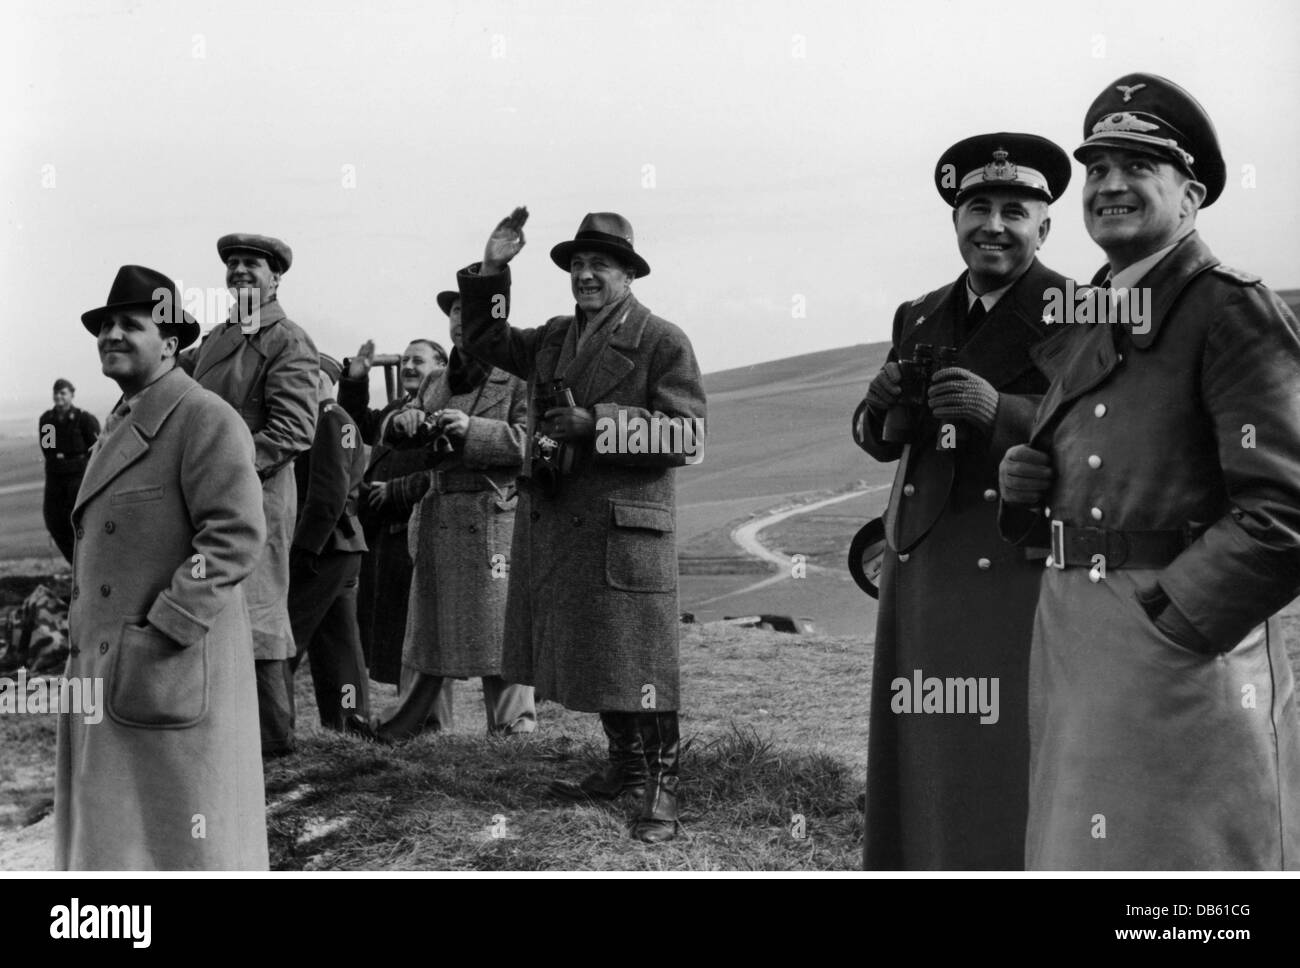 events, Second World War / WWII, aerial warfare, persons, a German Luftwaffe officer (Major Reuschle) and an officer of the Italien Regia Aeronautica observing an air force operation together, probably during the Battle of Britain, autumn 1940, Additional-Rights-Clearences-Not Available Stock Photo